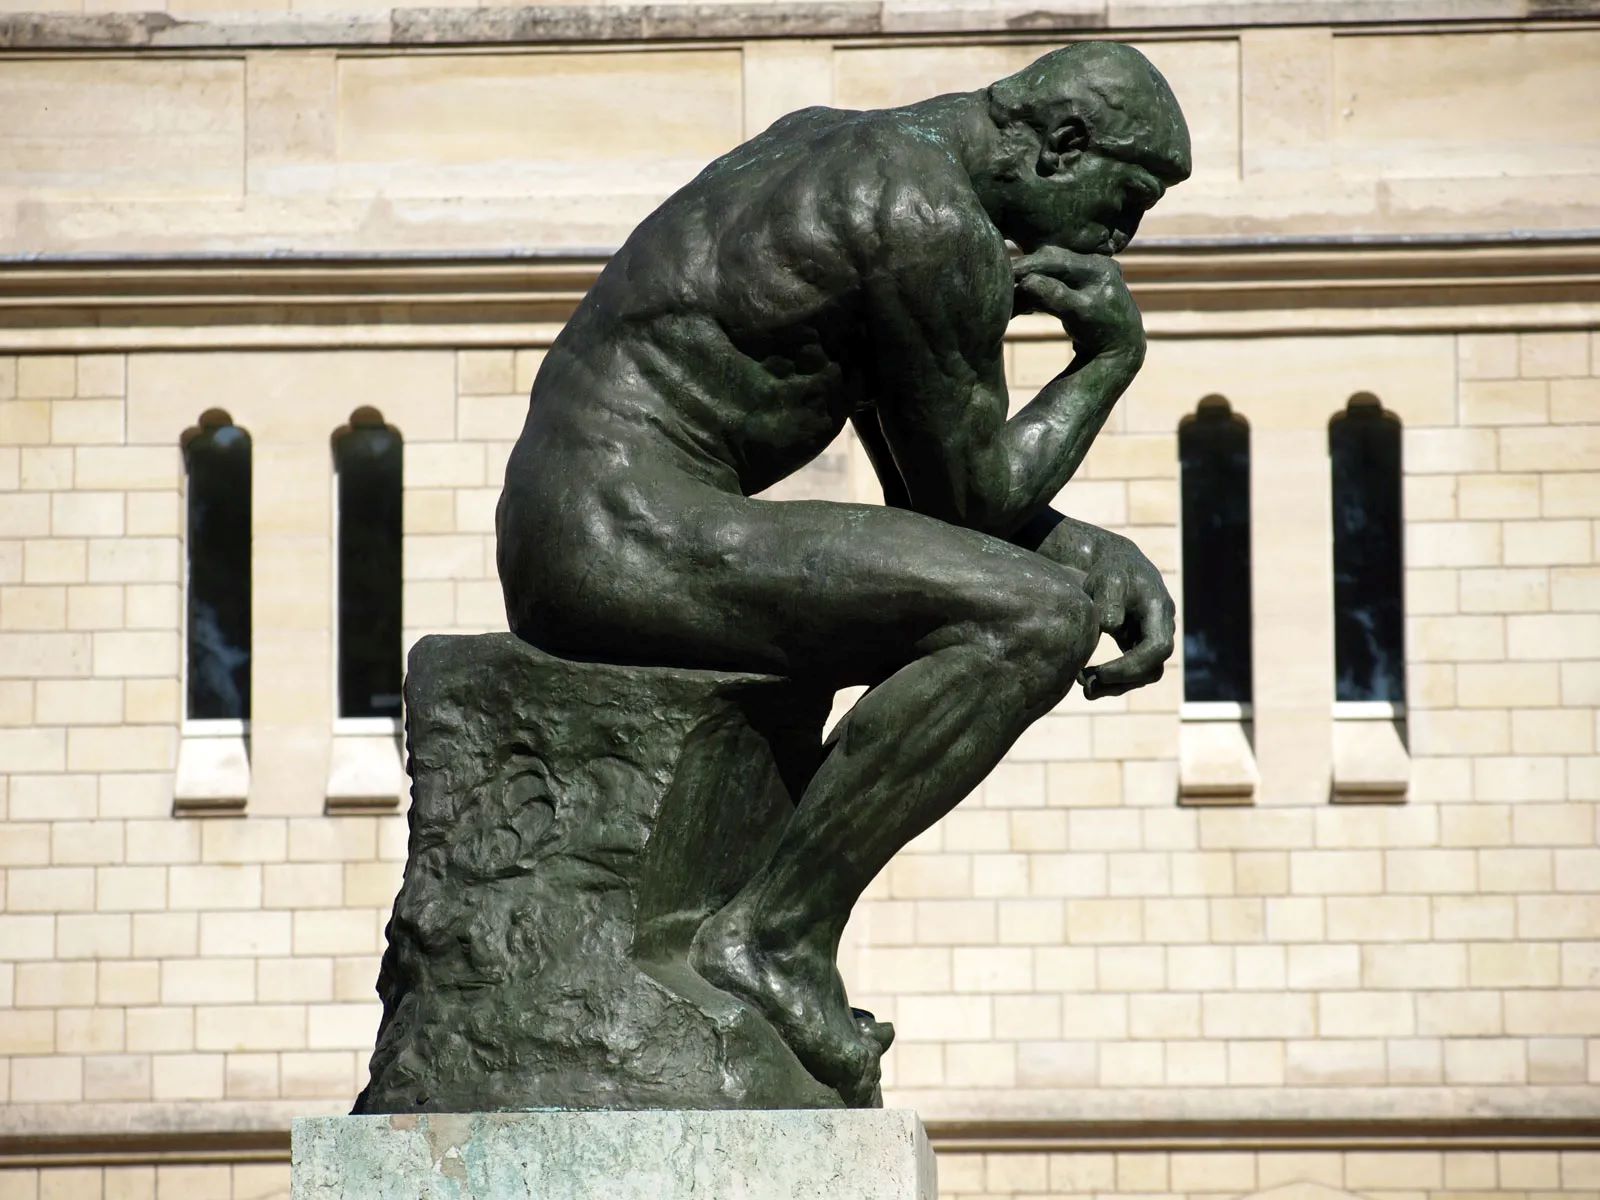 10 Surprising Facts About Rodin's The Thinker - Facts.net